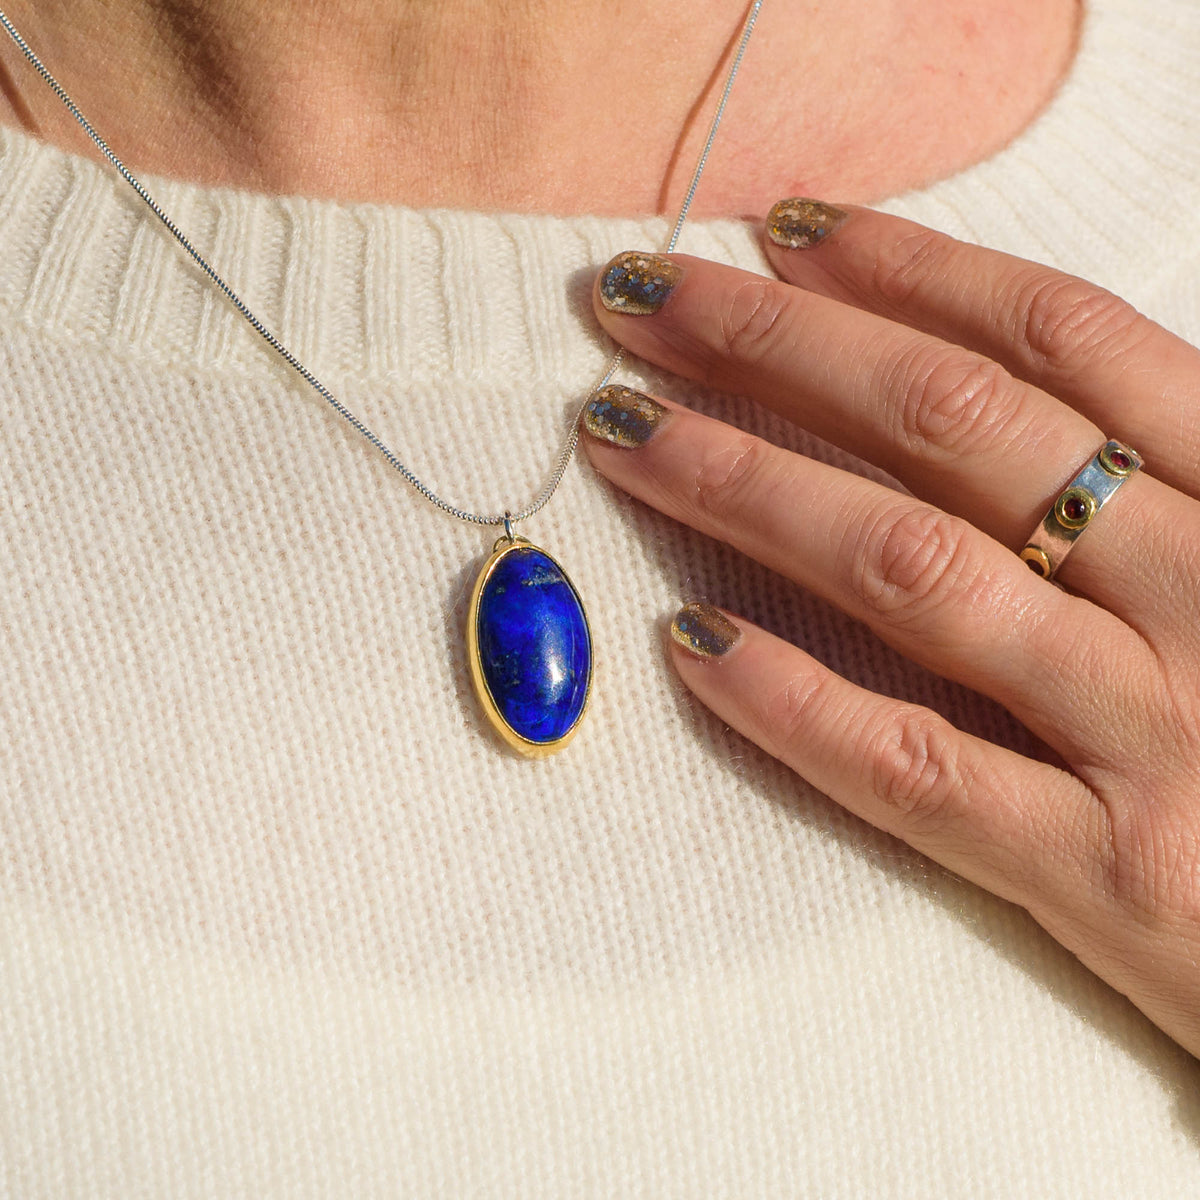 Vivid Blue Lapis Lazuli Oval with Pyrite set in 22K gold Pendant only